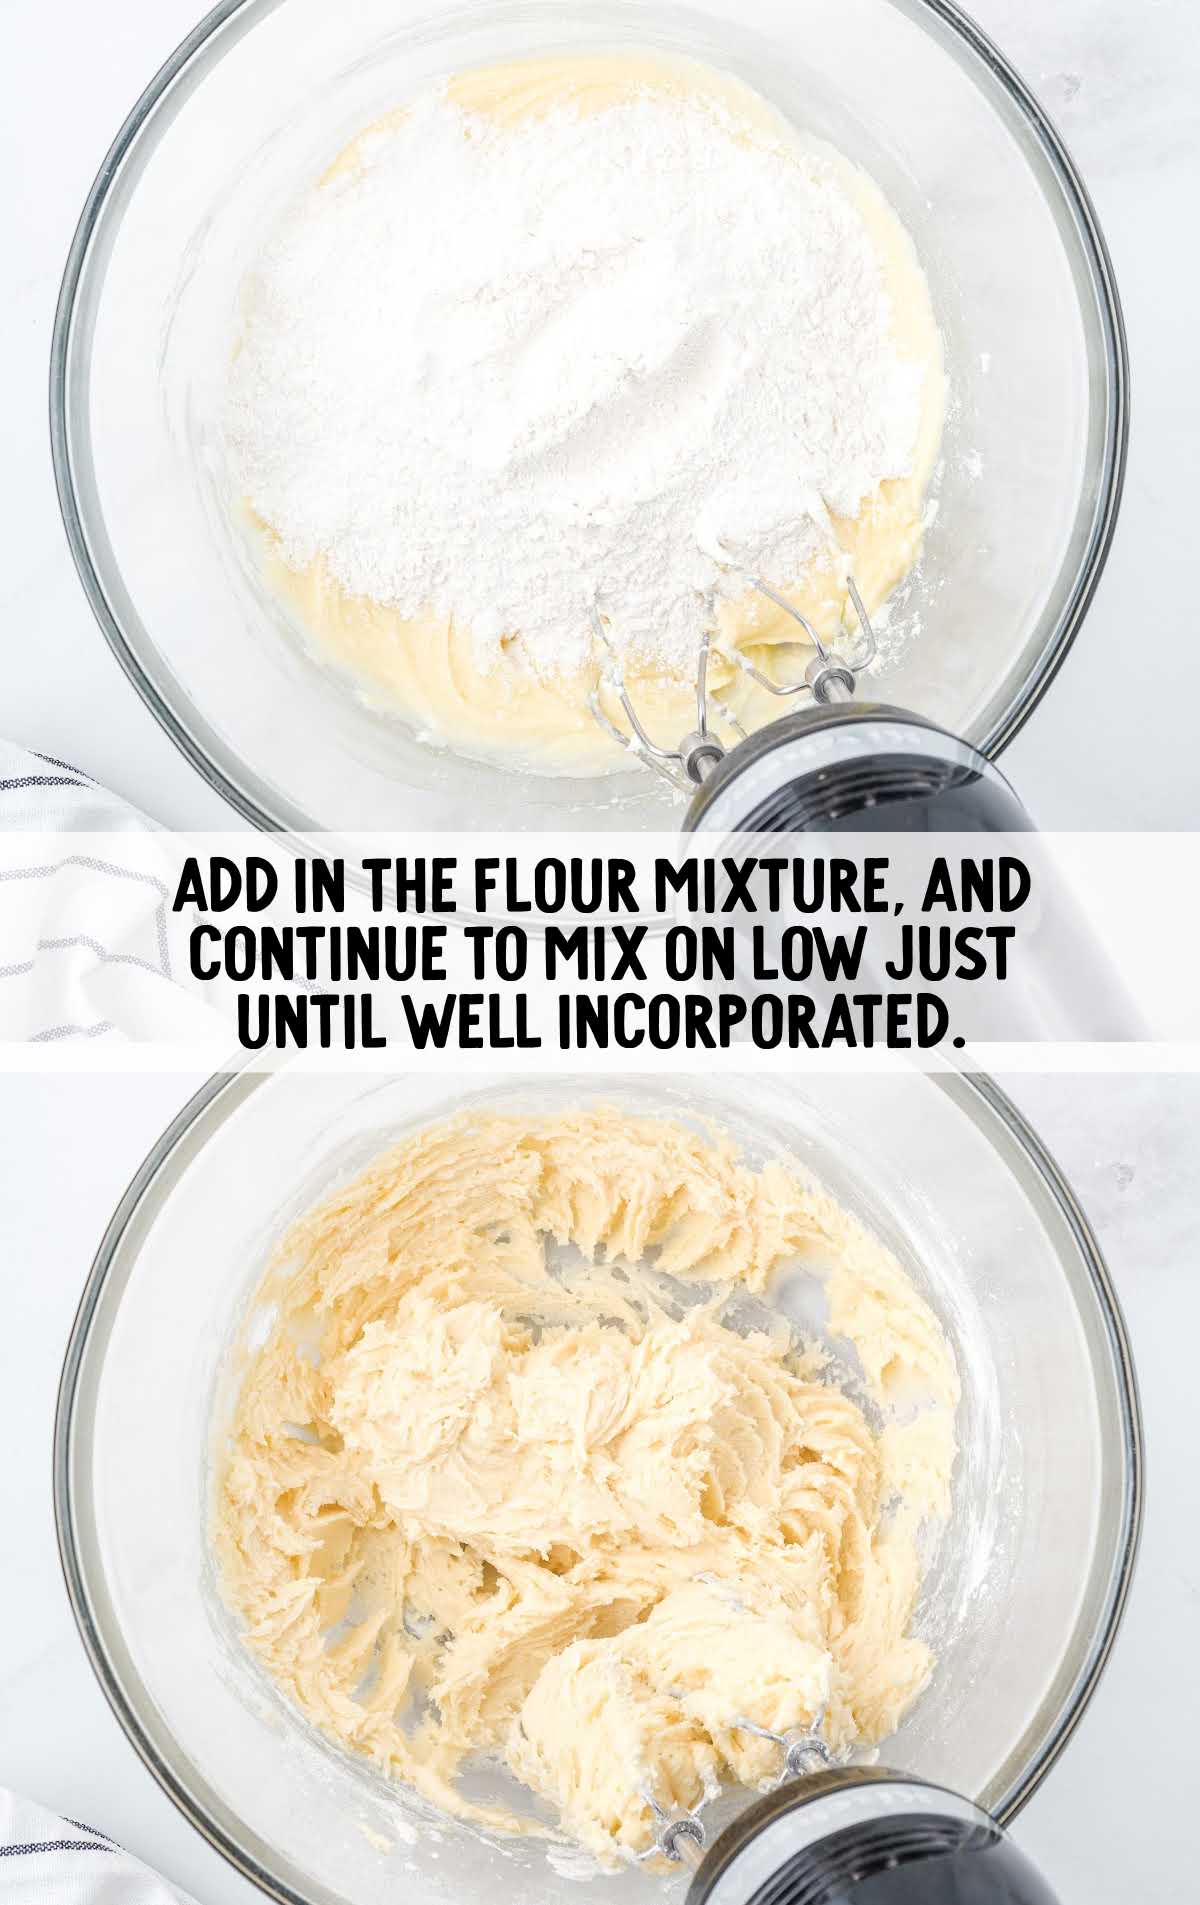 flour mixture added to the egg mixture in a bowl and blended together